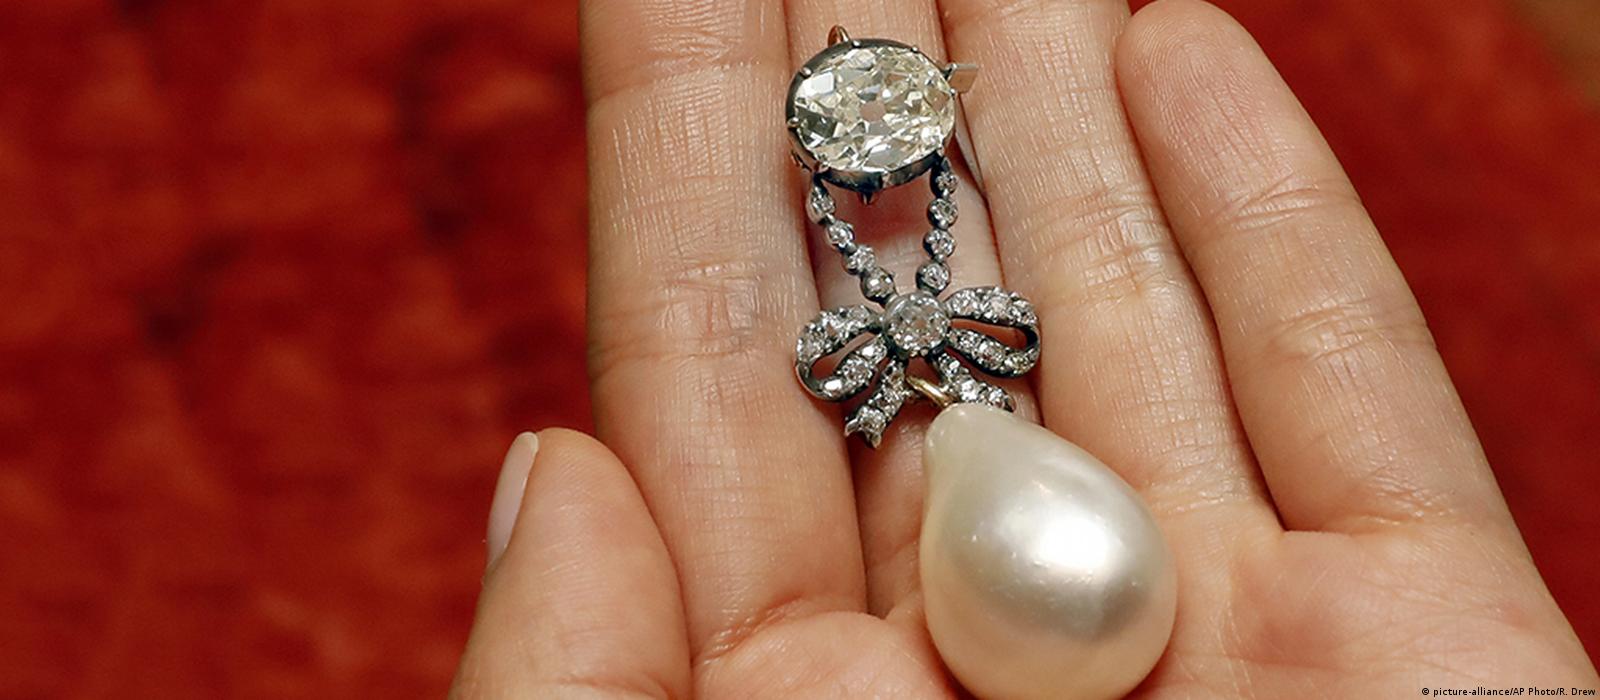 How Marie Antoinette's Jewelry Ends Up on Auction